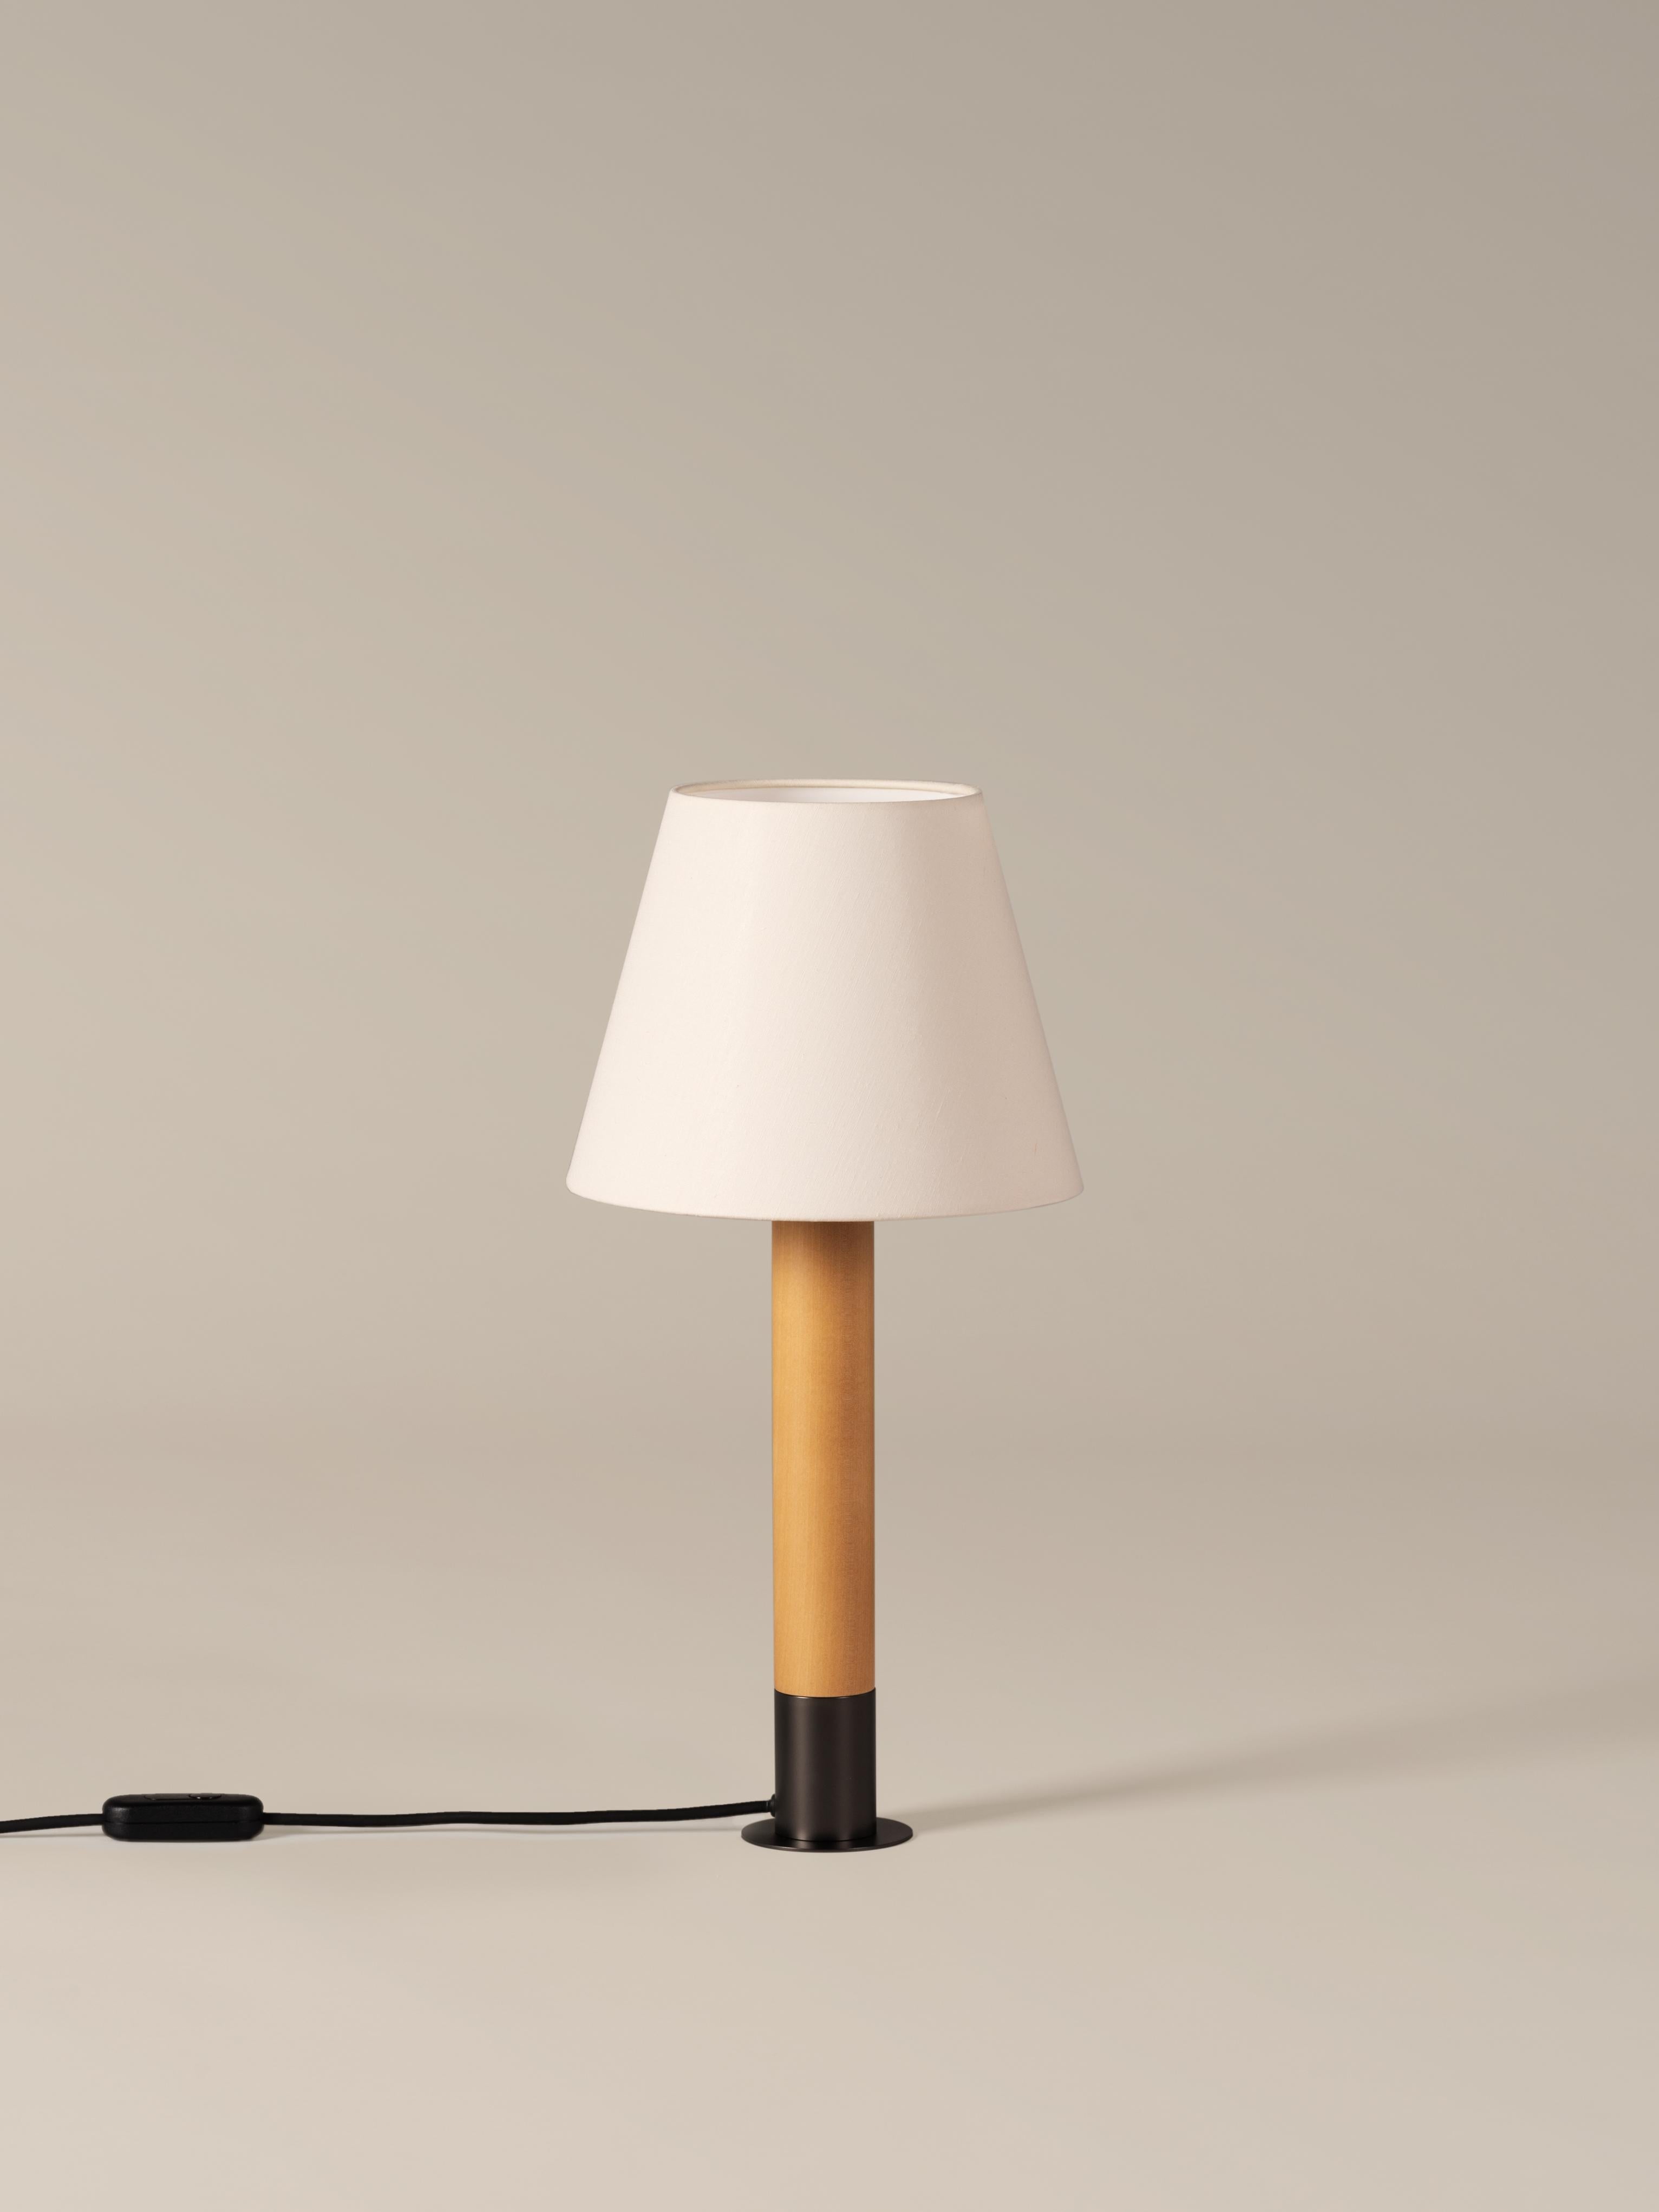 Modern Bronze and White Básica M1 Table Lamp by Santiago Roqueta, Santa & Cole For Sale